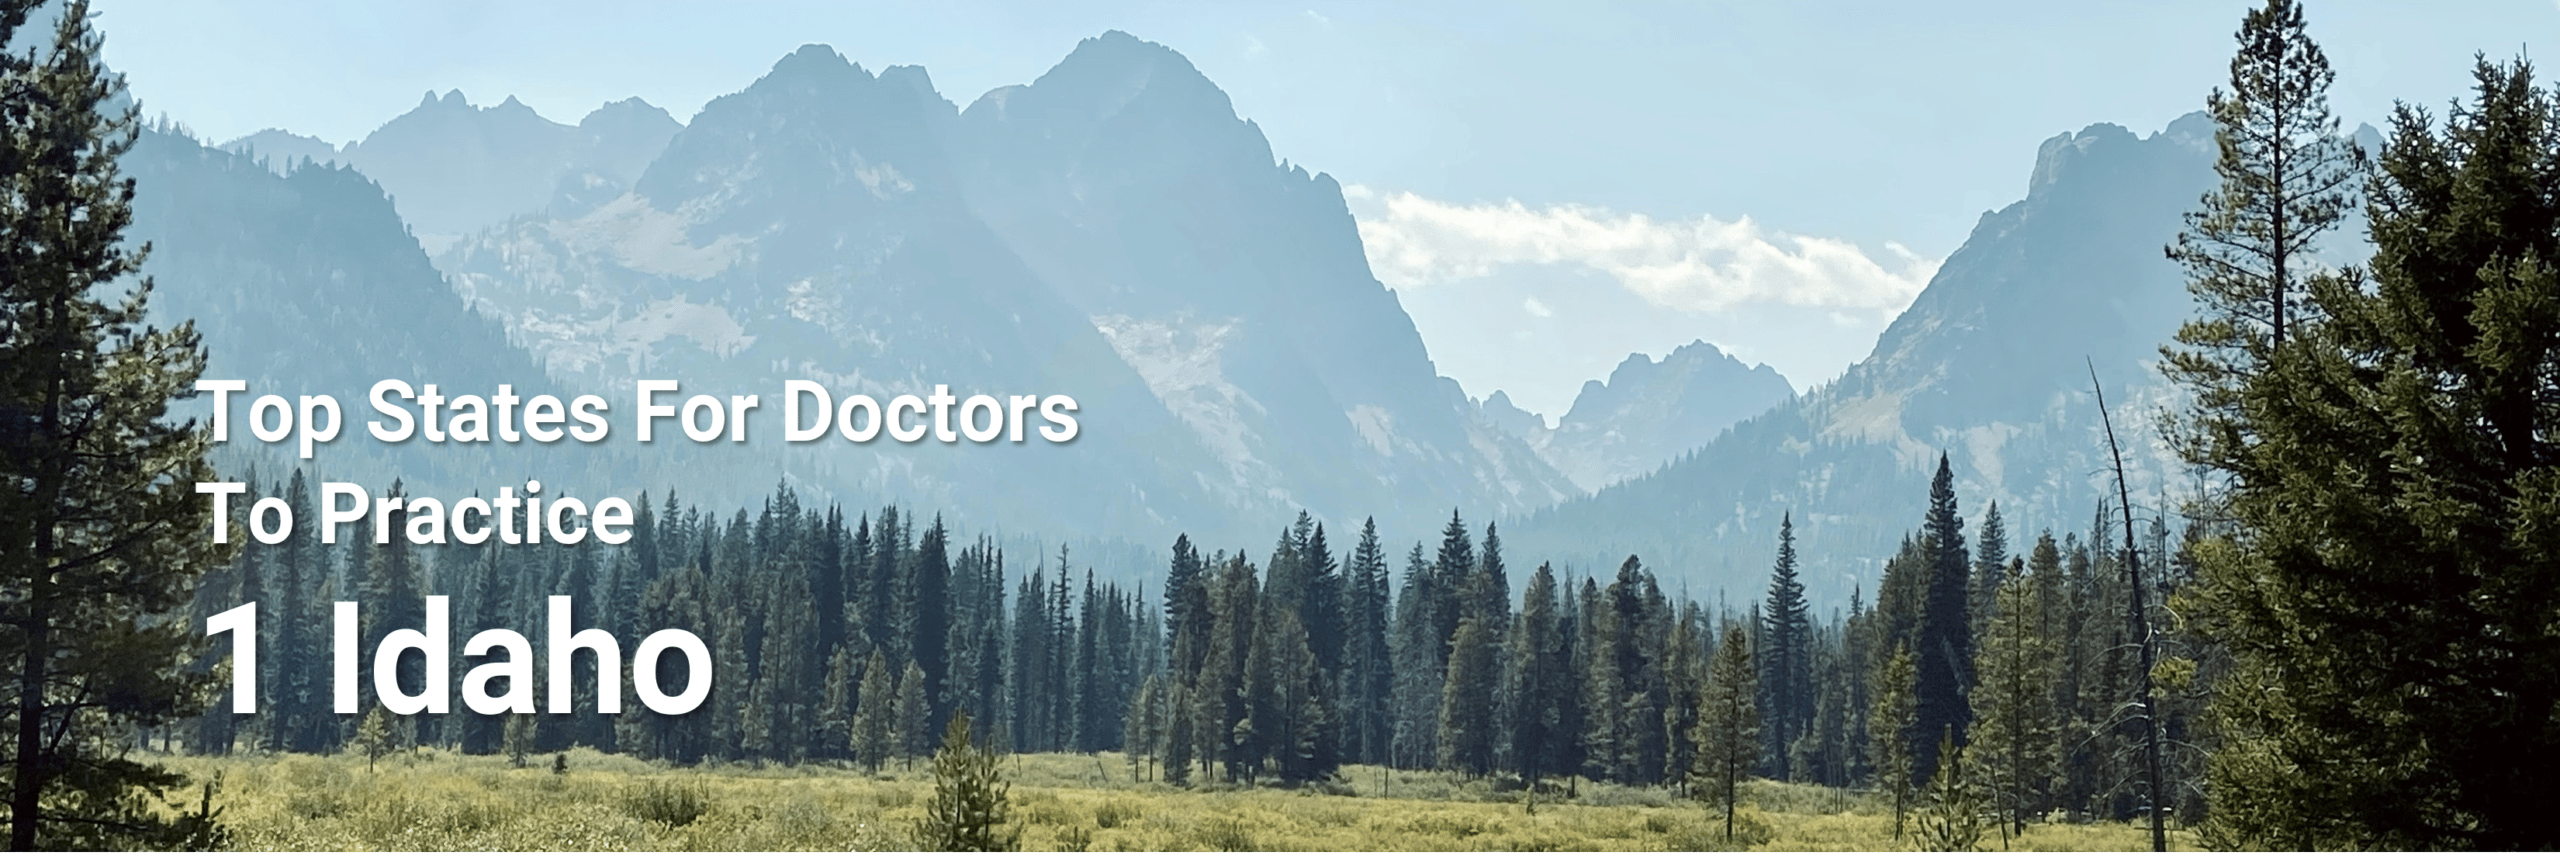 Top States for Doctors to Practice 1 Idaho